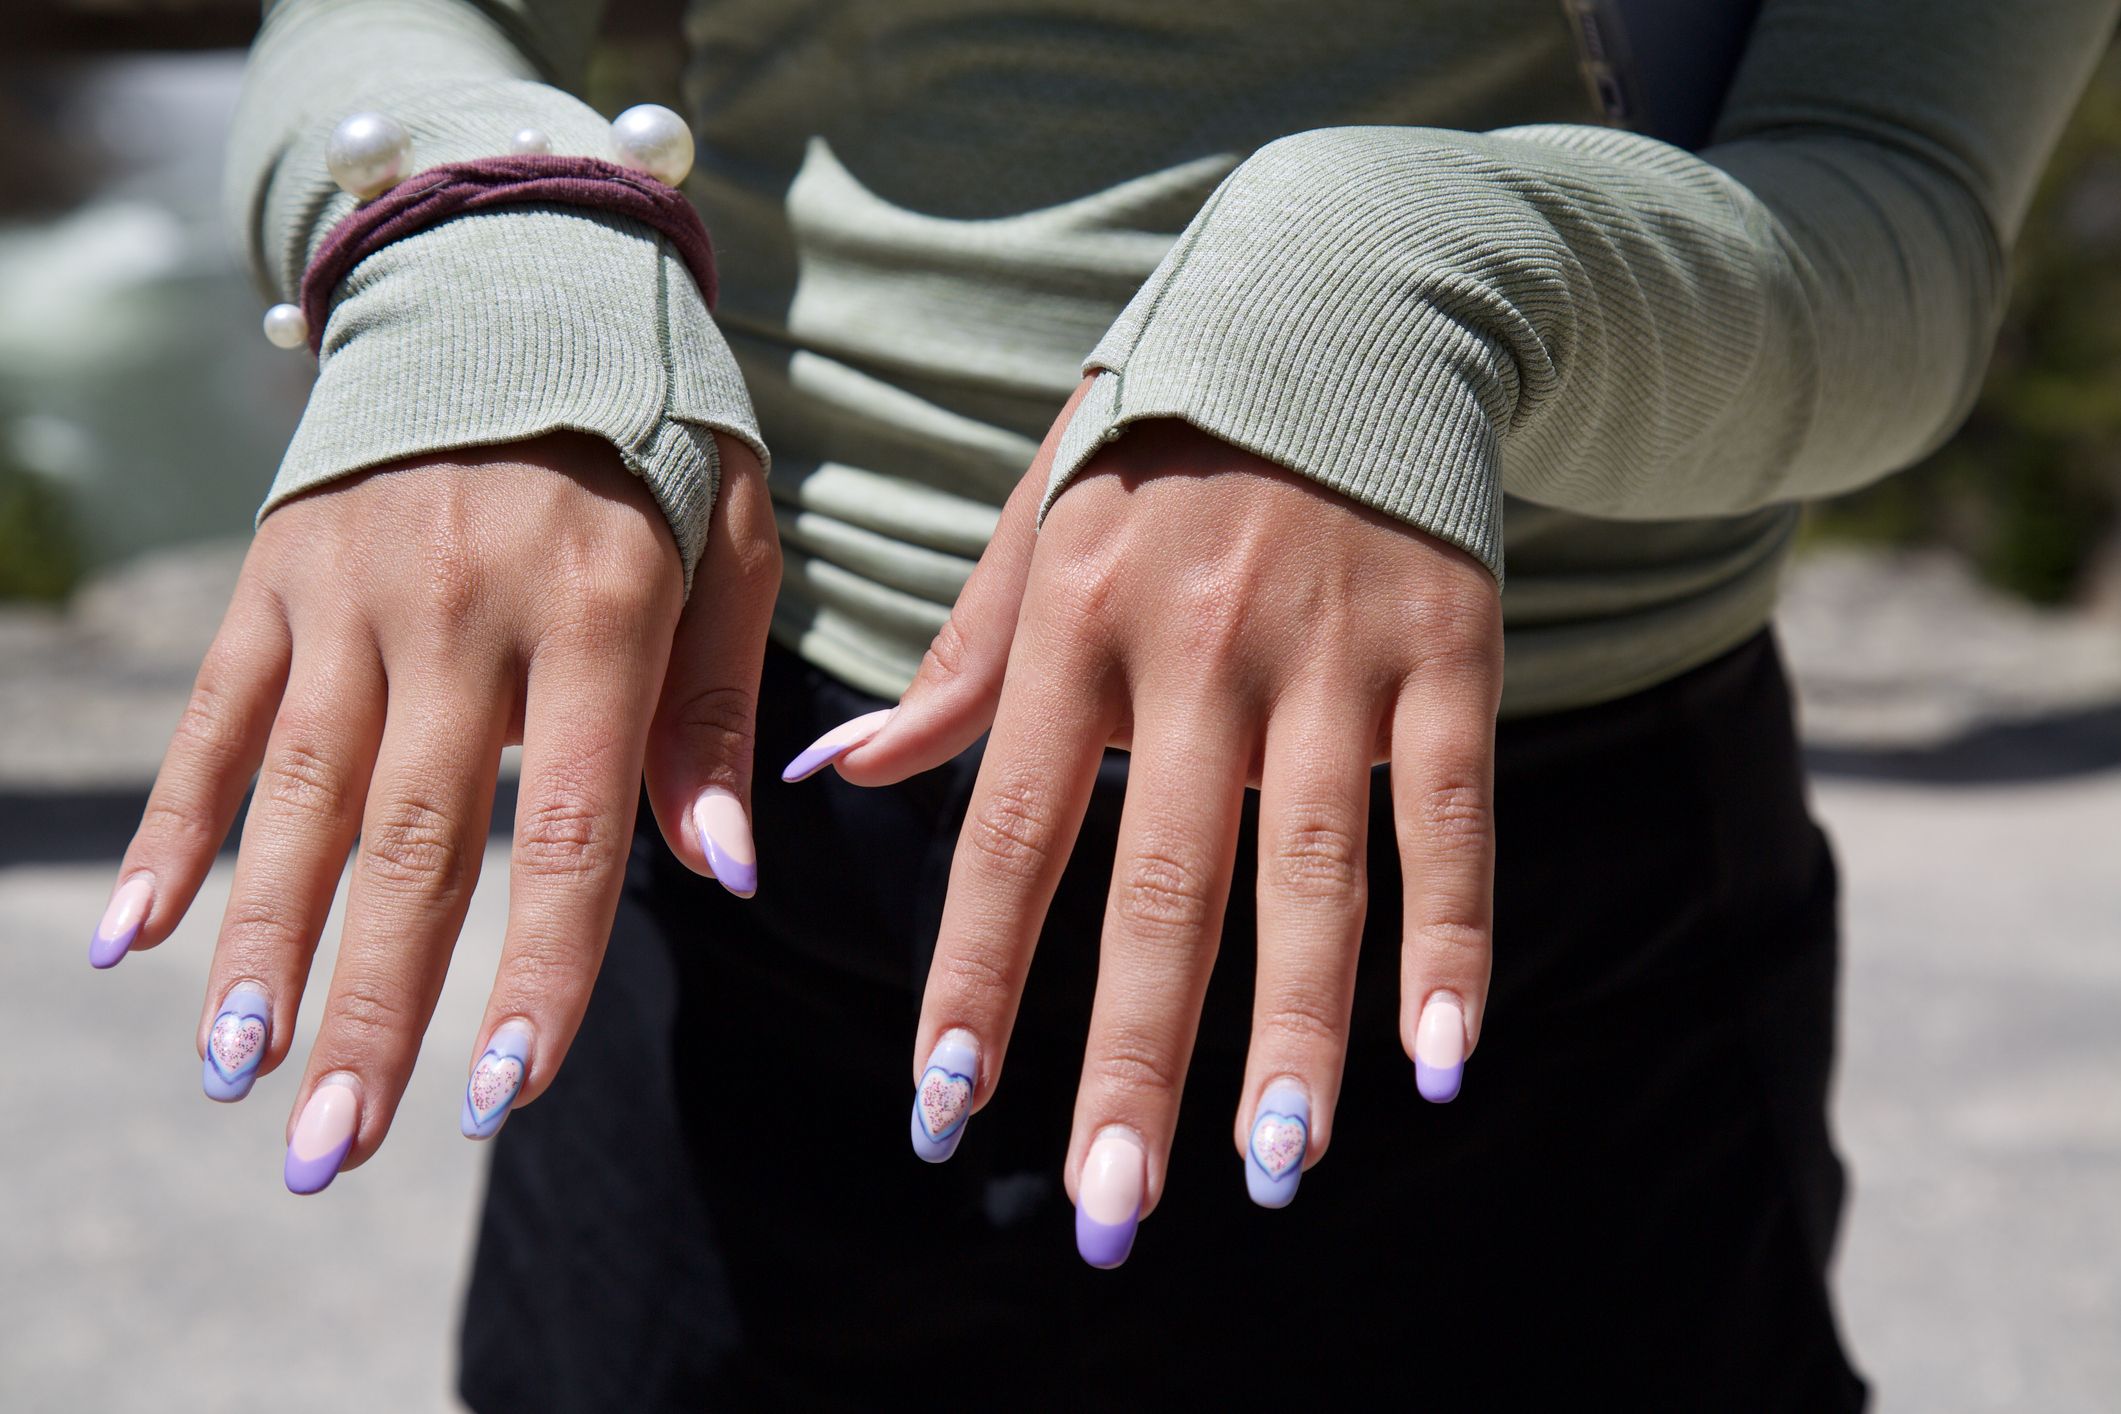 How to get the best out of your gel manicure